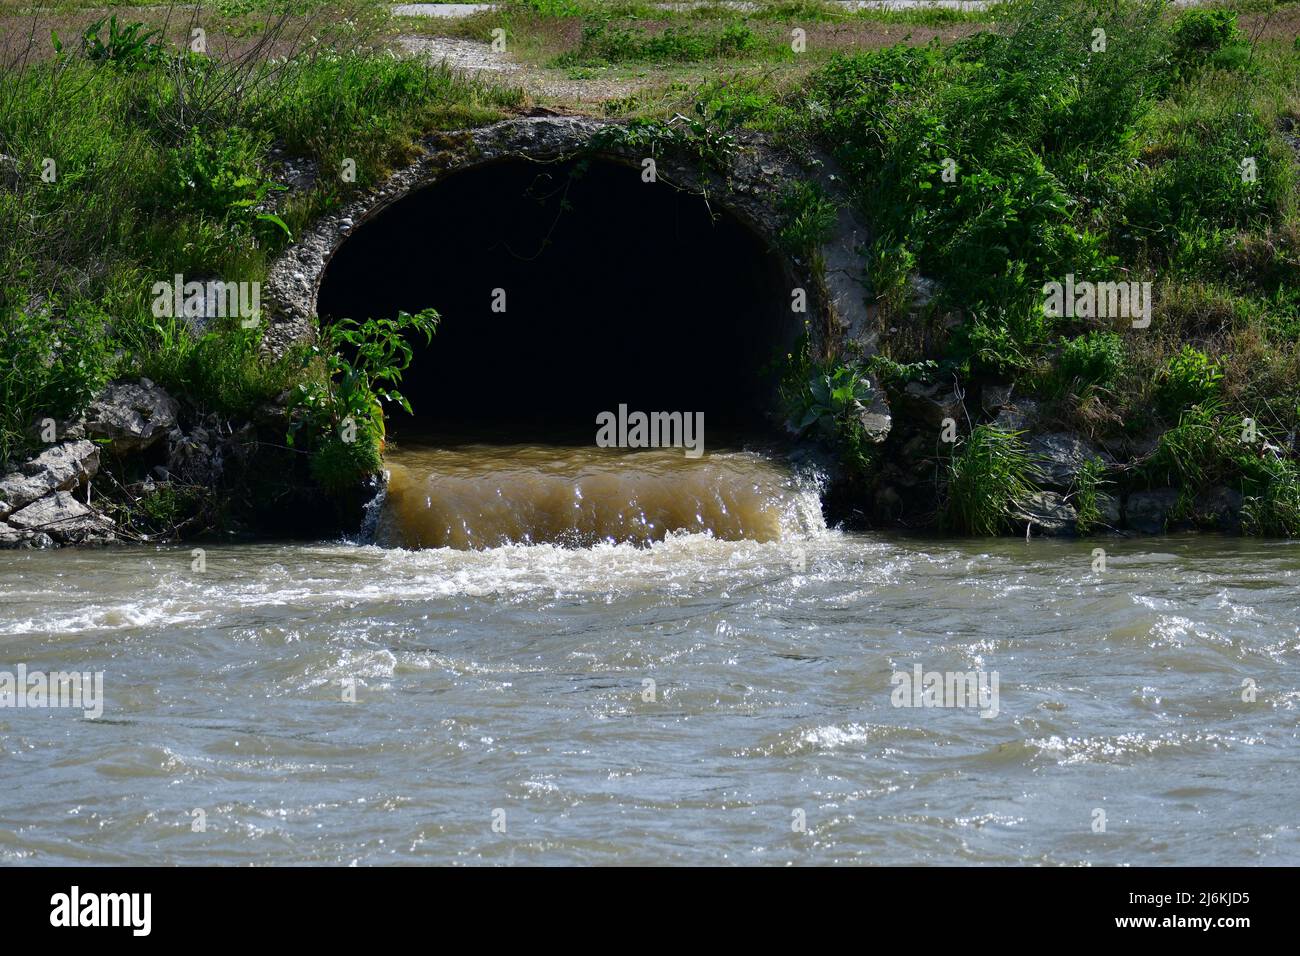 Dirty sewage from the pipe, environmental pollution Stock Photo